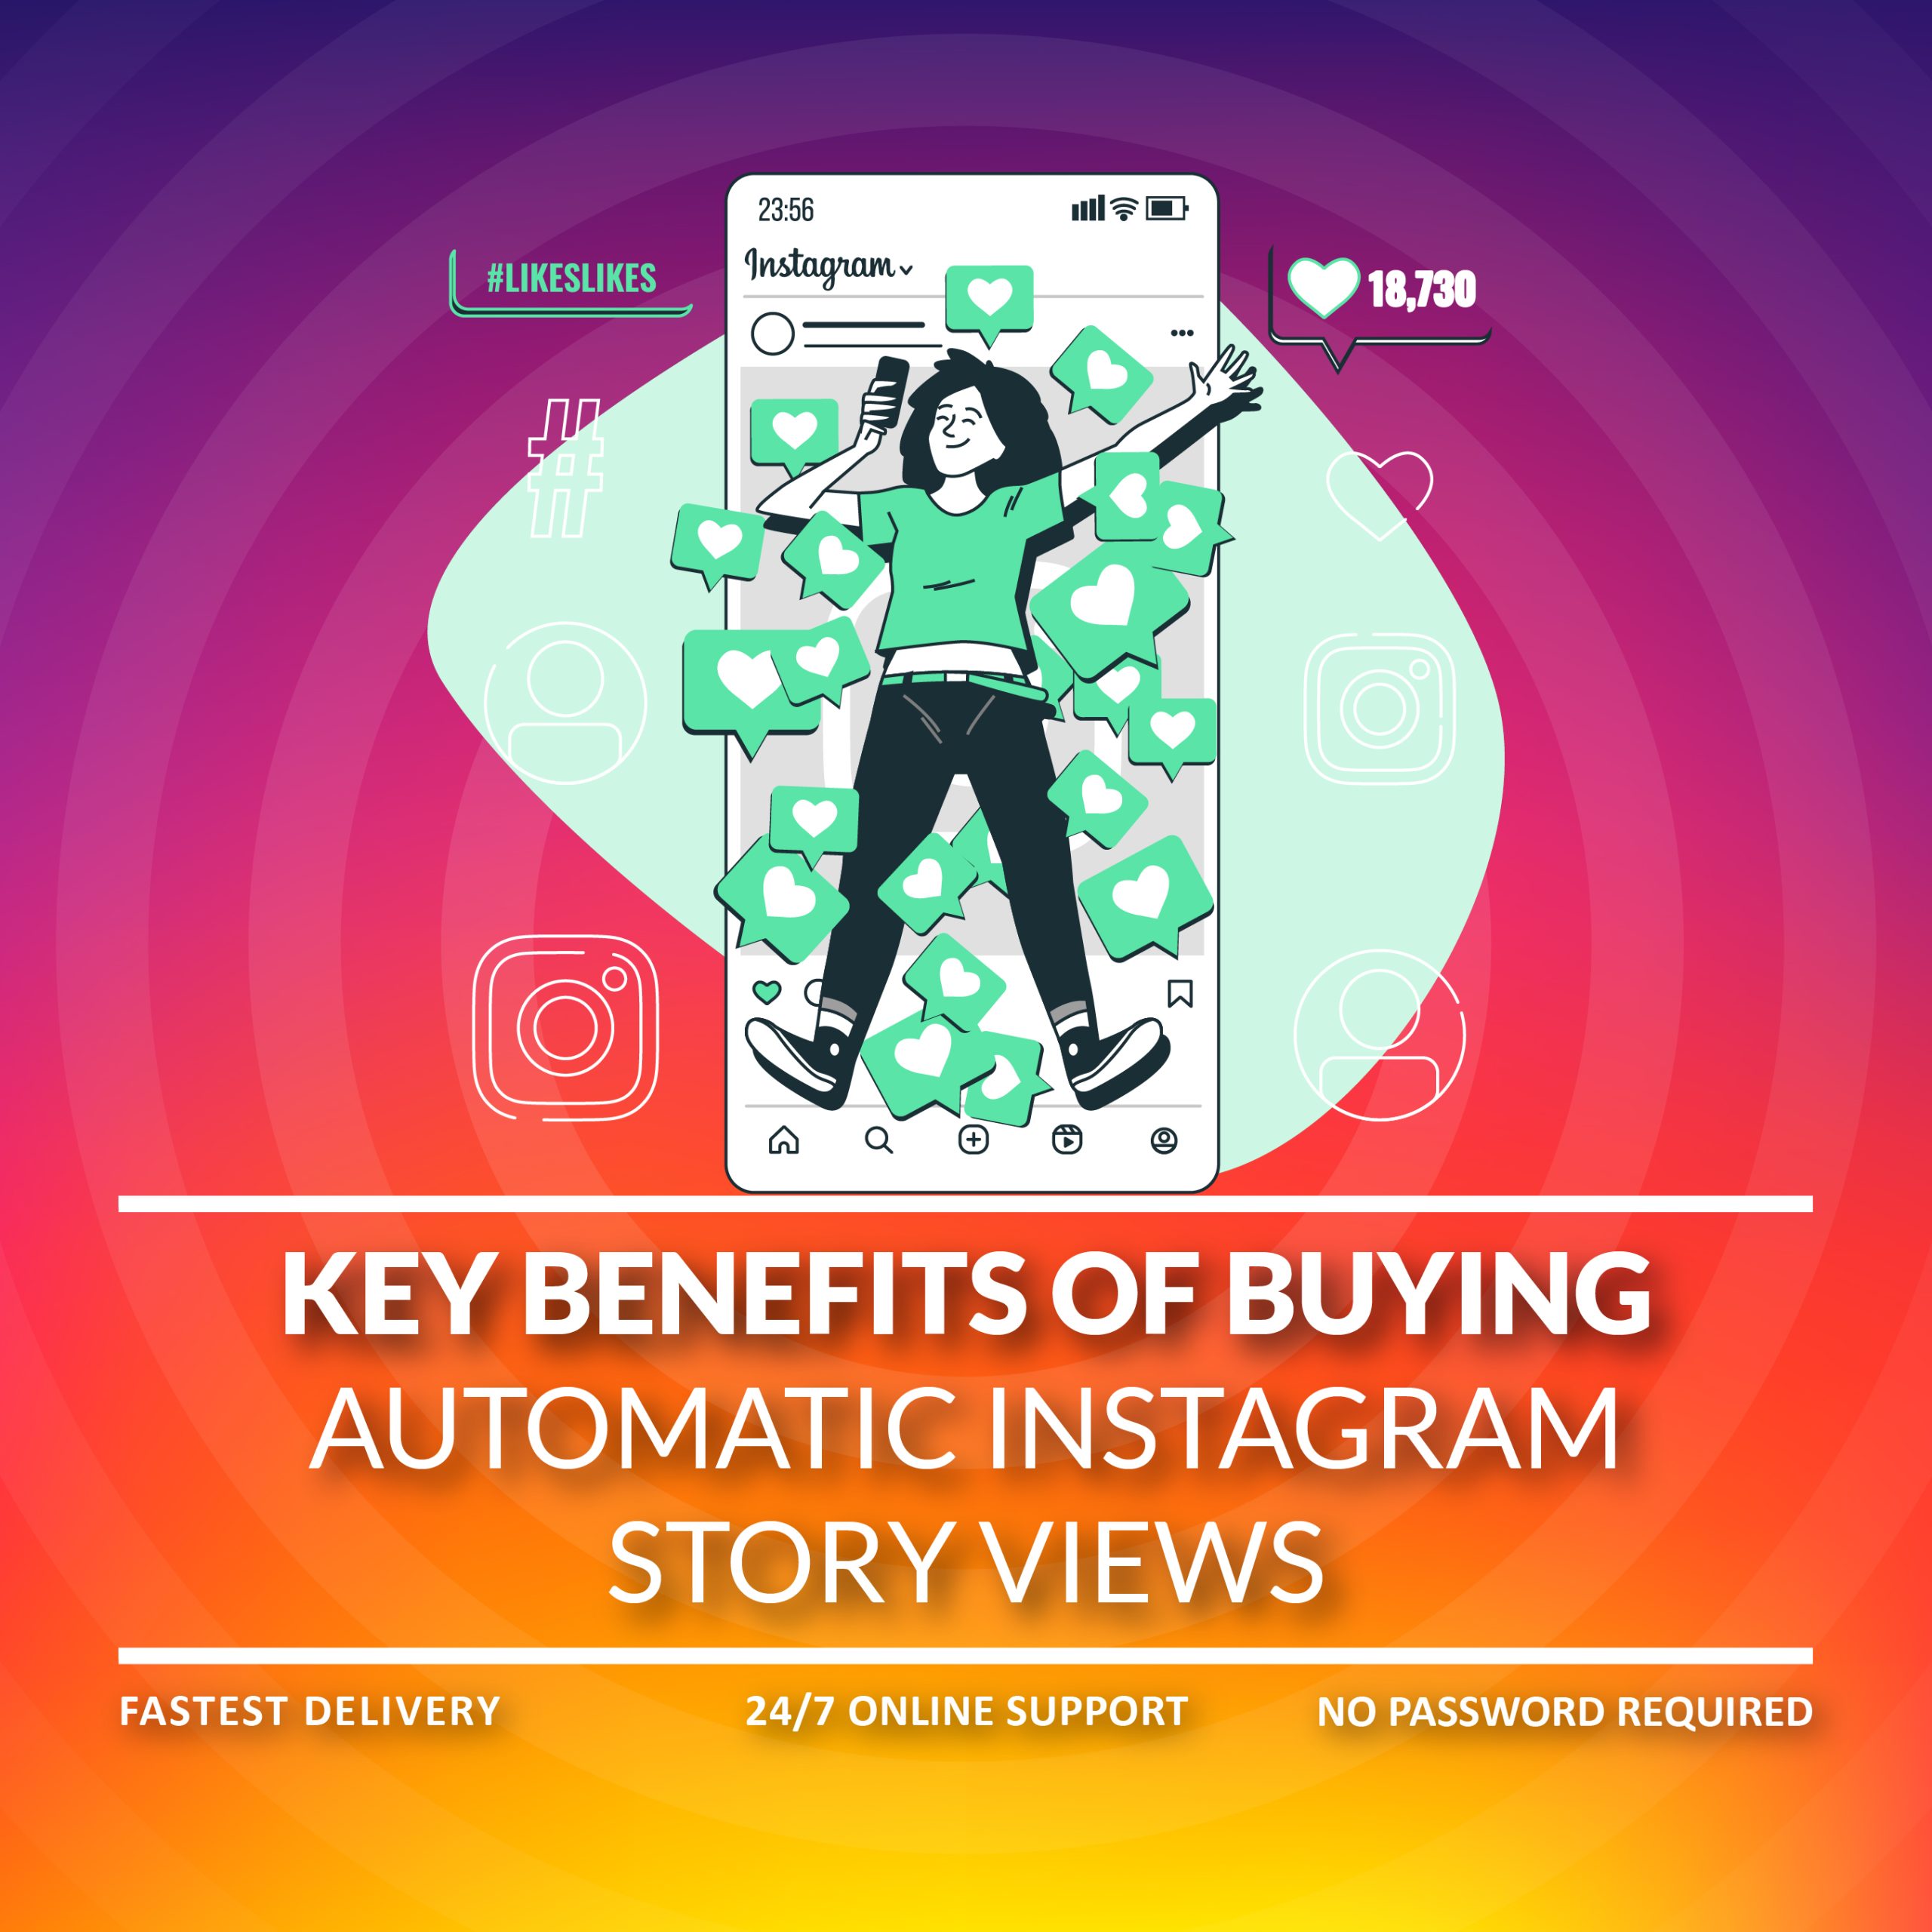 Key Benefits of Buying Automatic Instagram Story Views